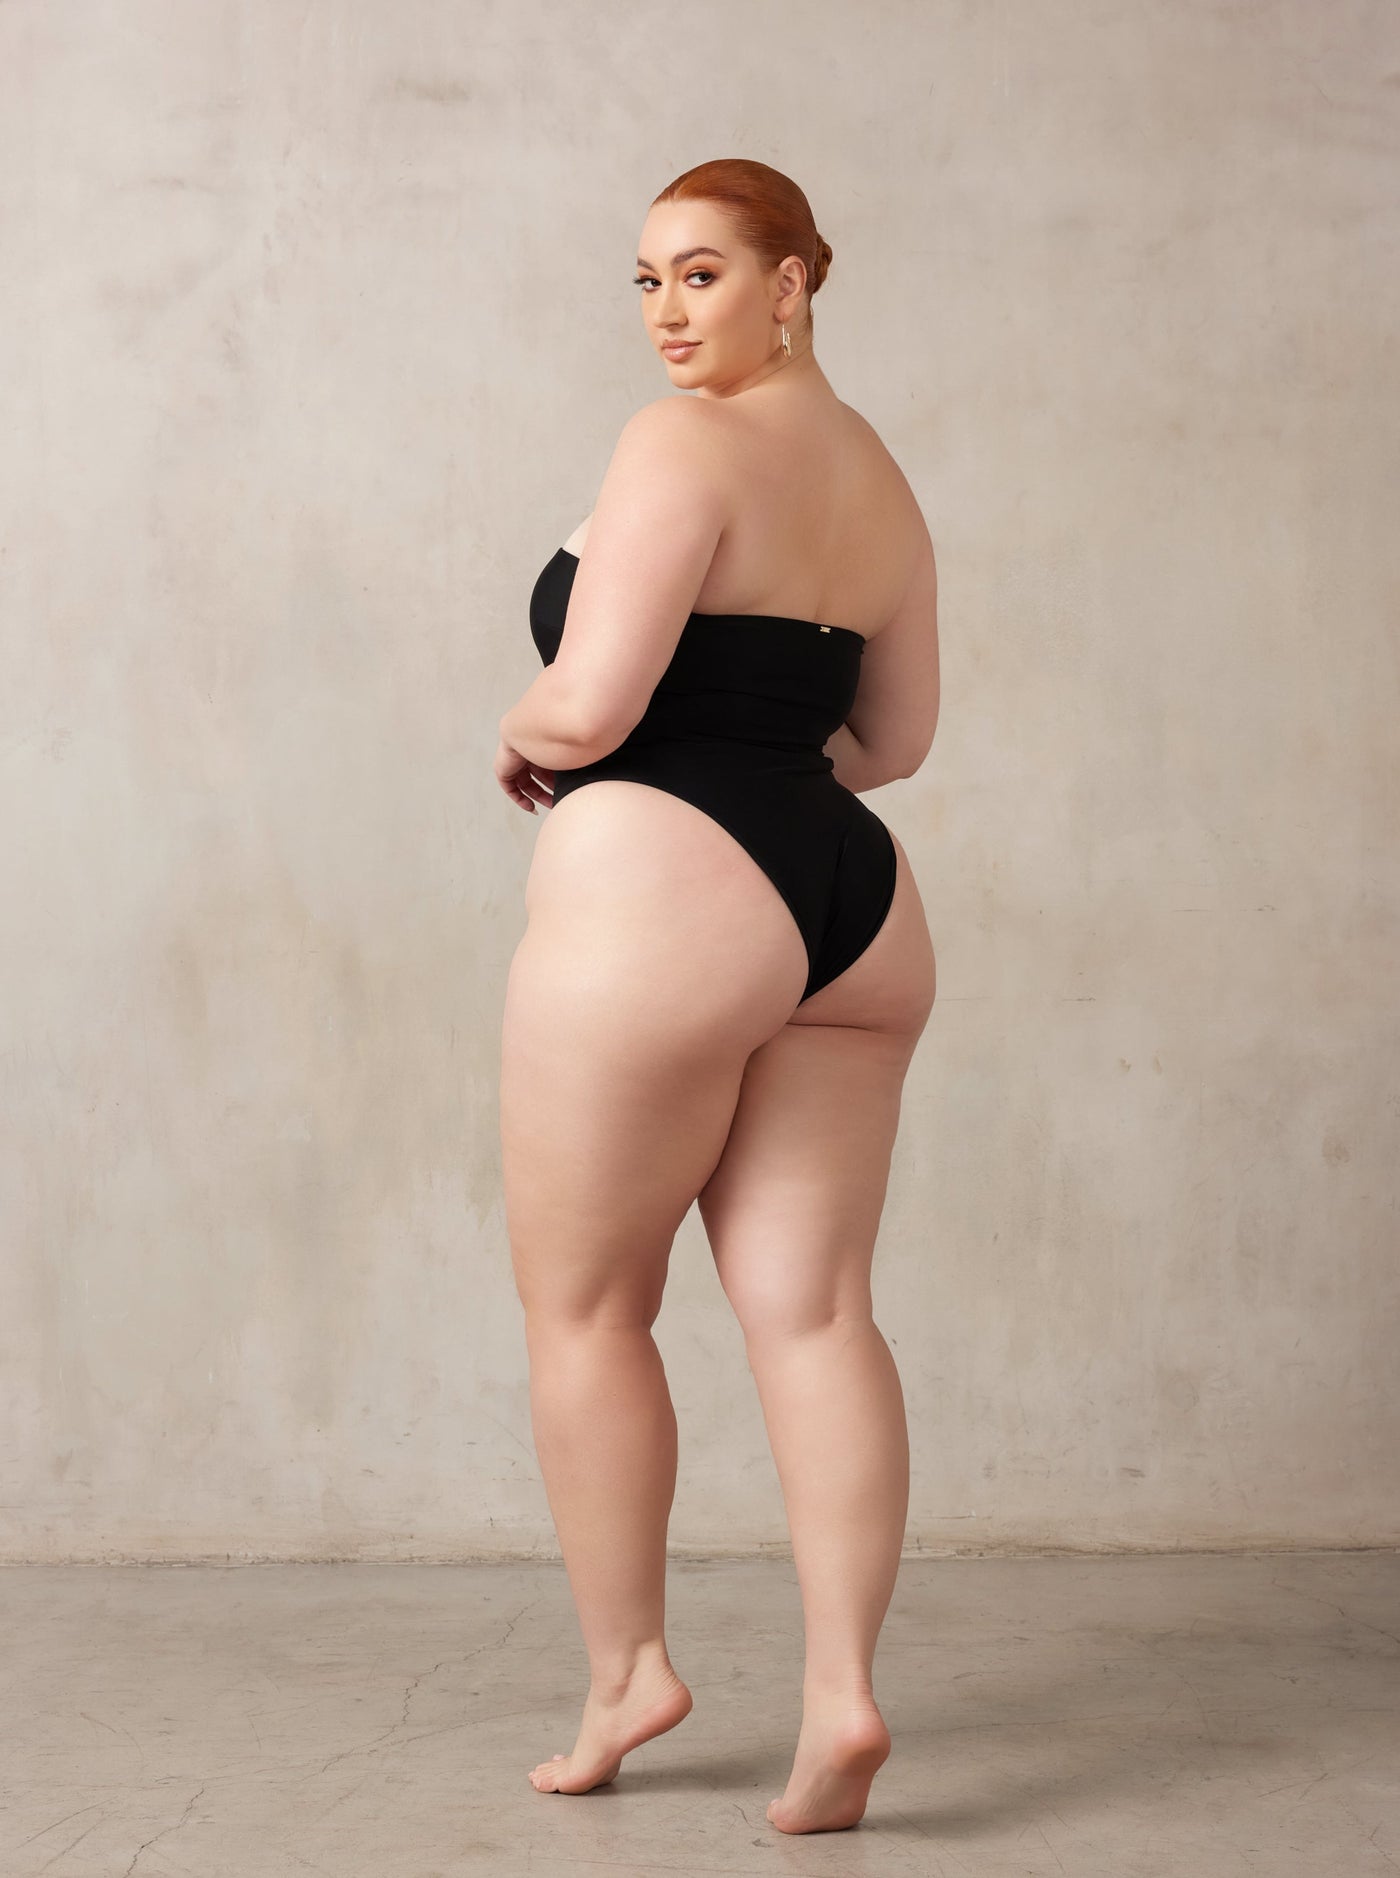 MBM Swim, Marcia B Maxwell high-cut Black cut-out one-piece swimsuit on beautiful midsize curve model, black owned #color_black